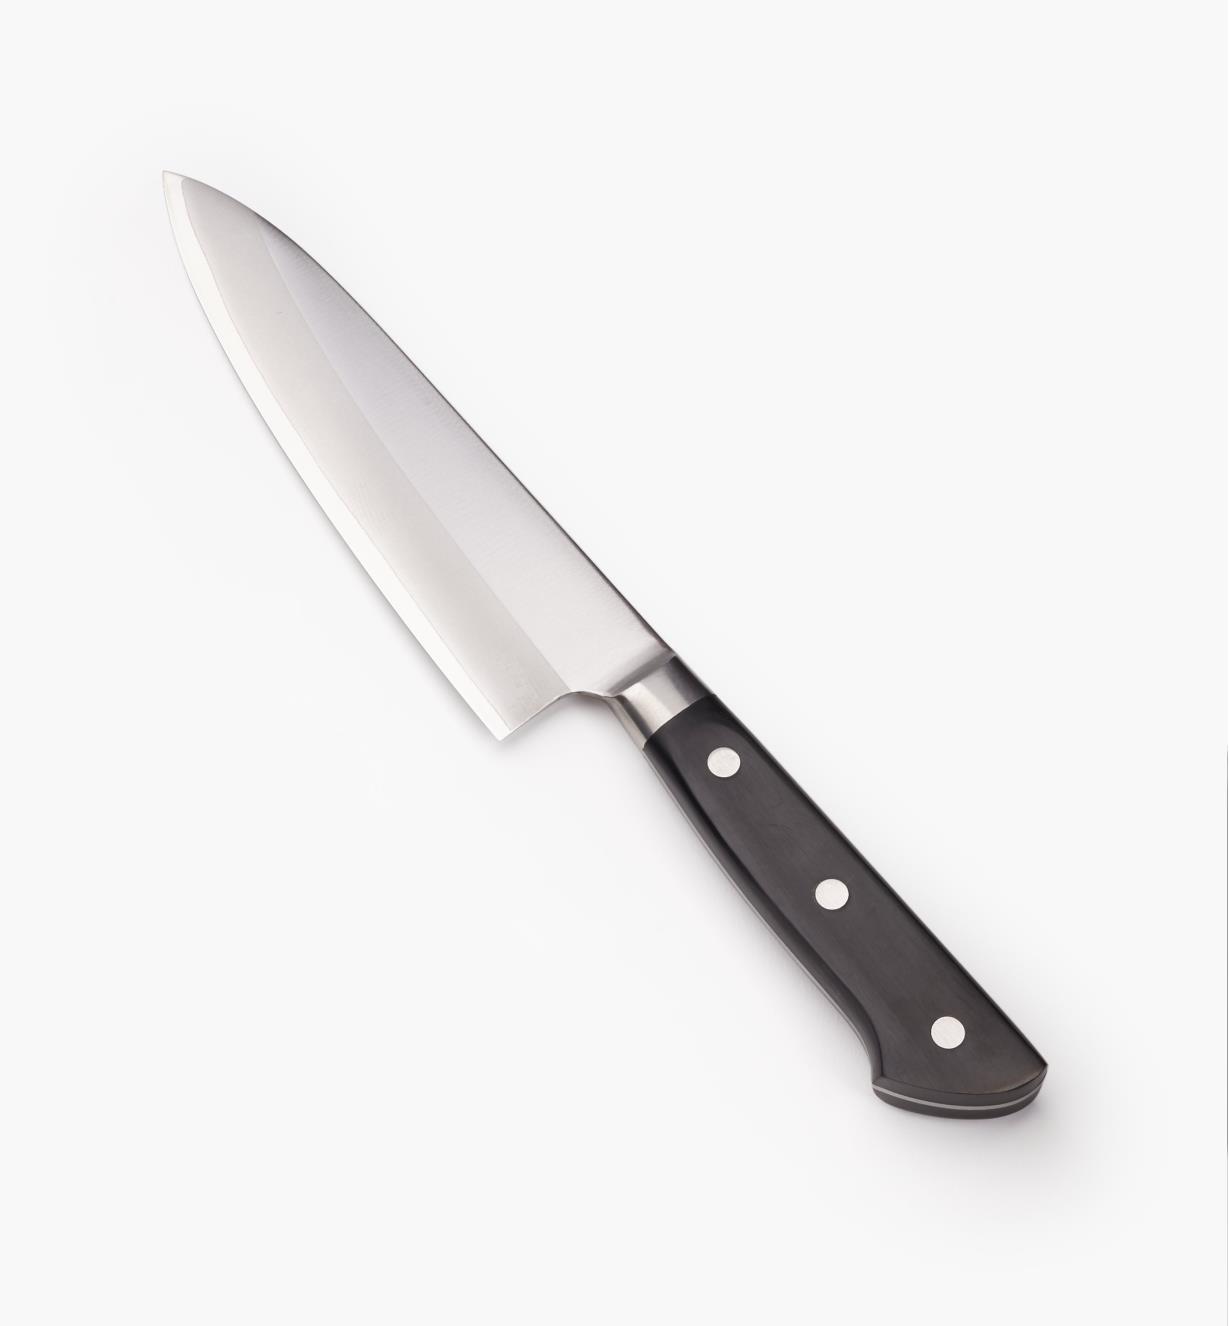 60W0503 - 175mm (6 7/8") Chef's Knife